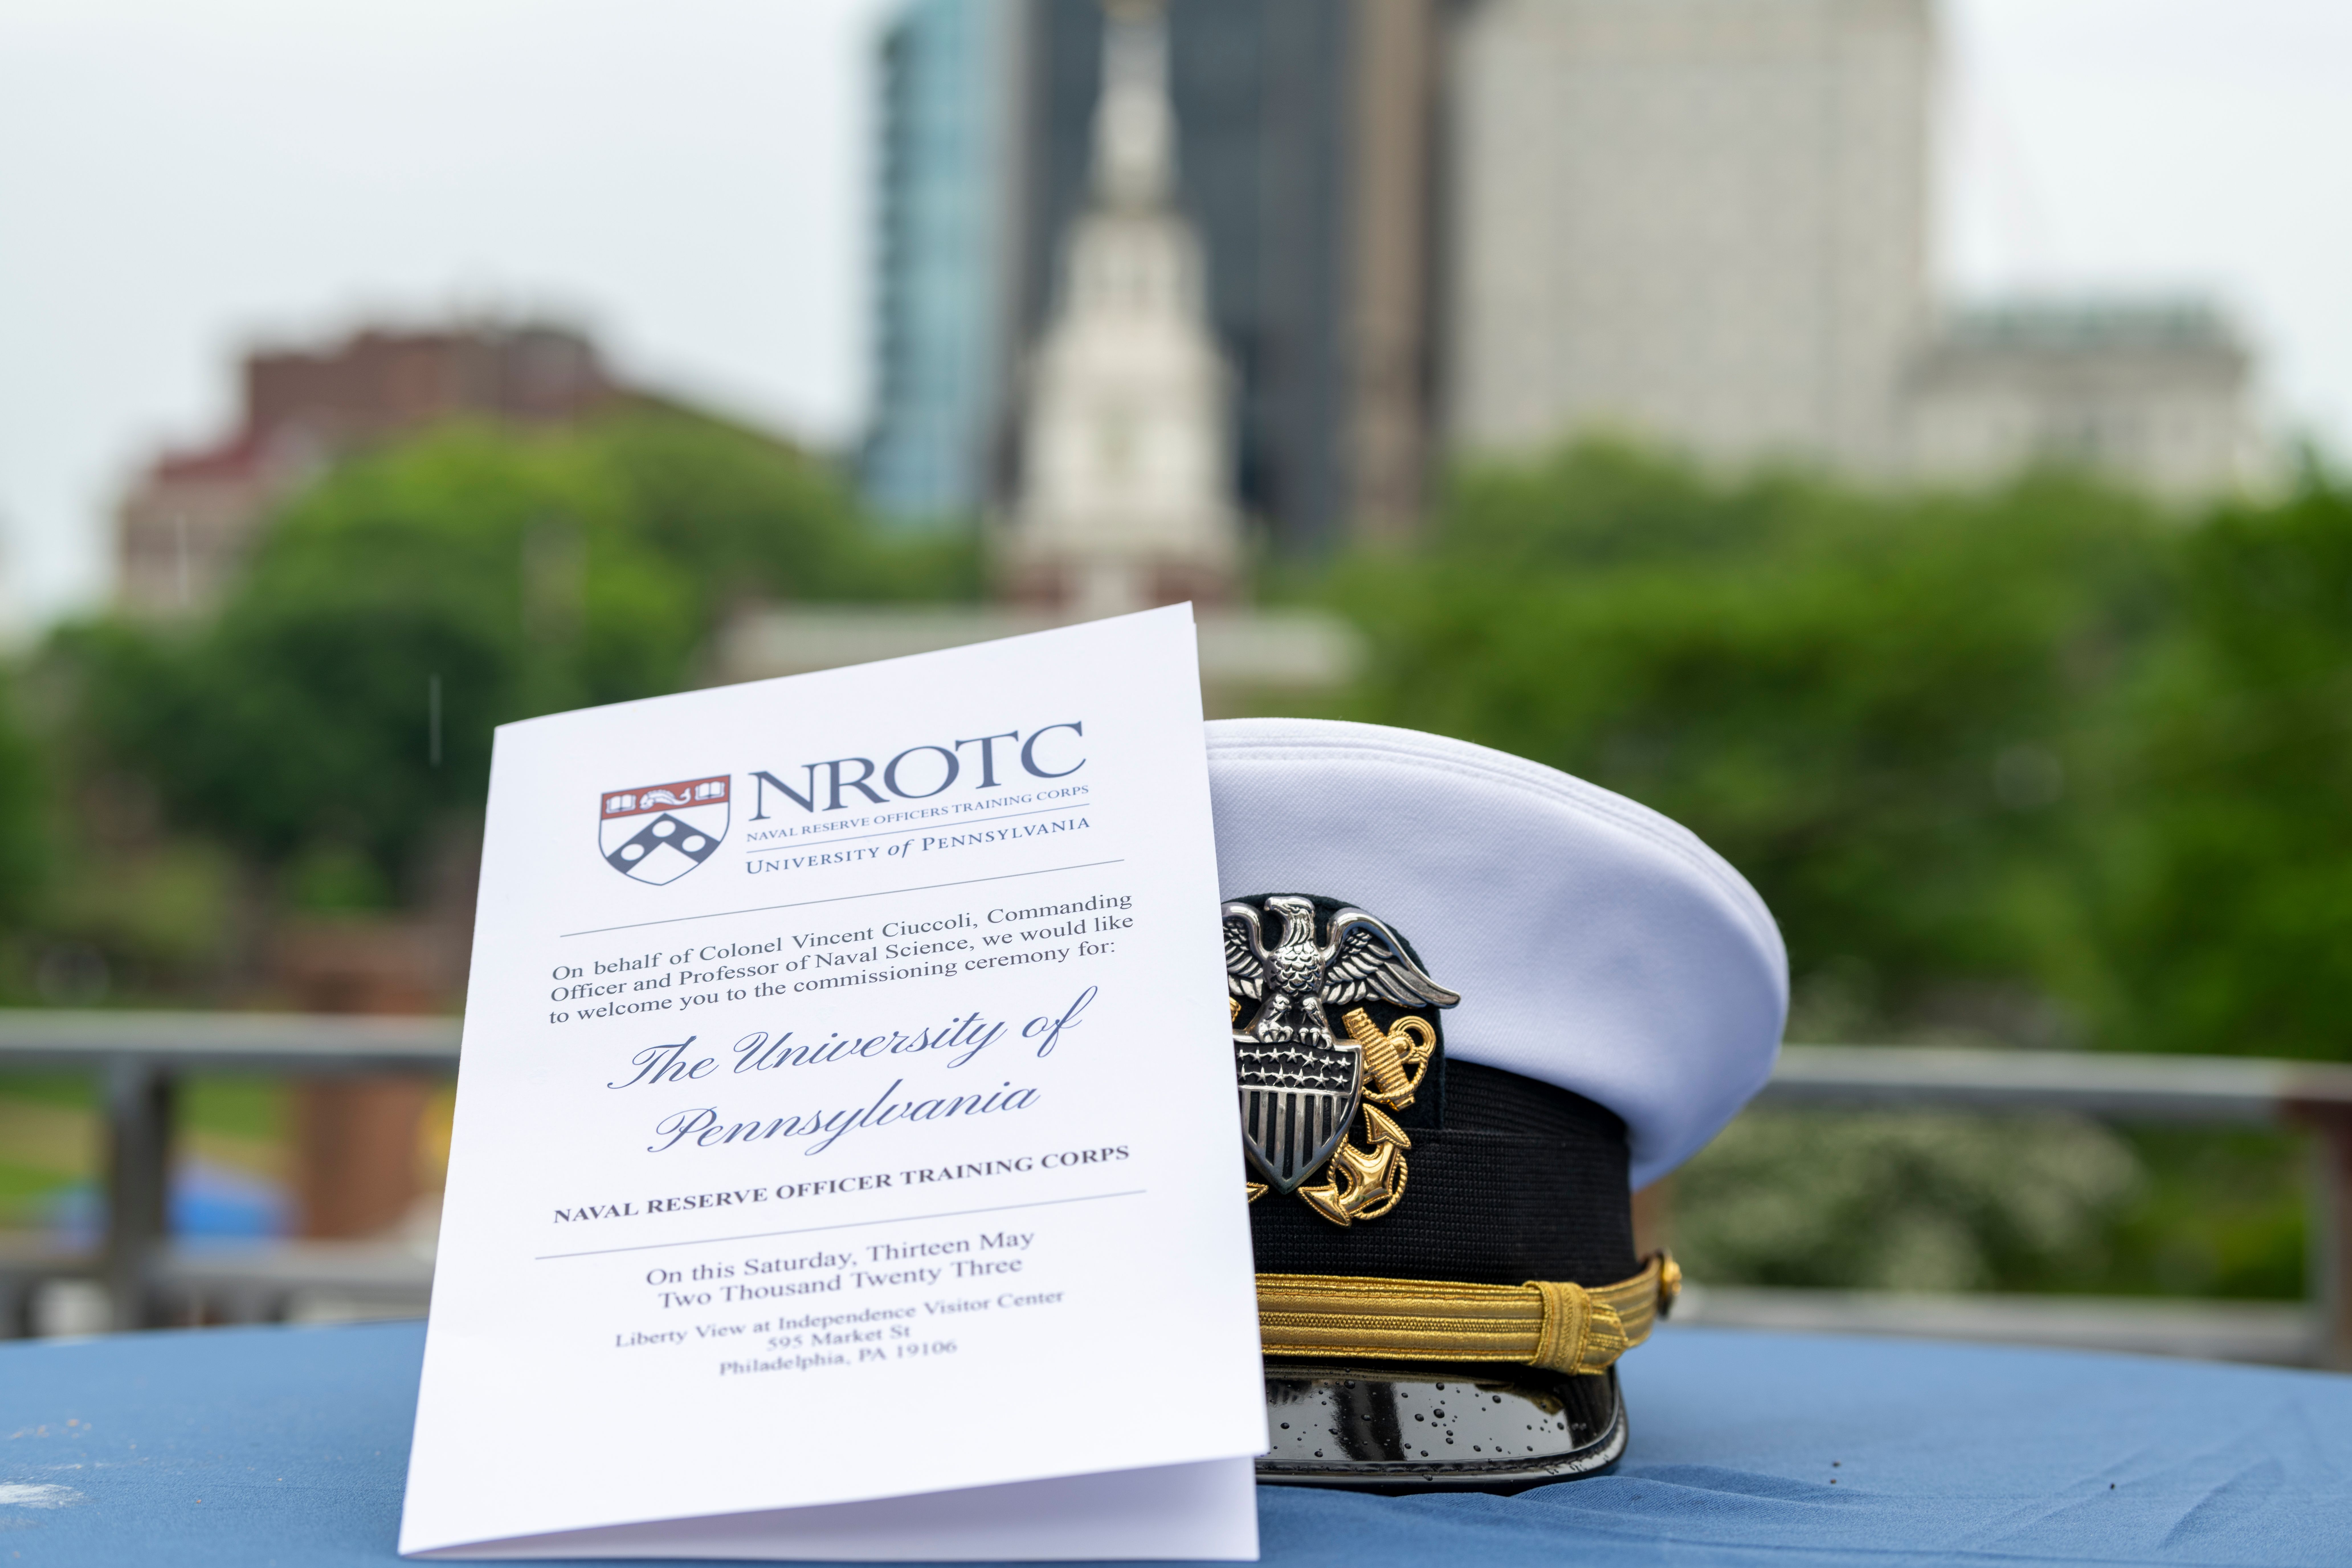 An Ensign cover and program pamphlet lay on a balcony table with Independence Hall in the background